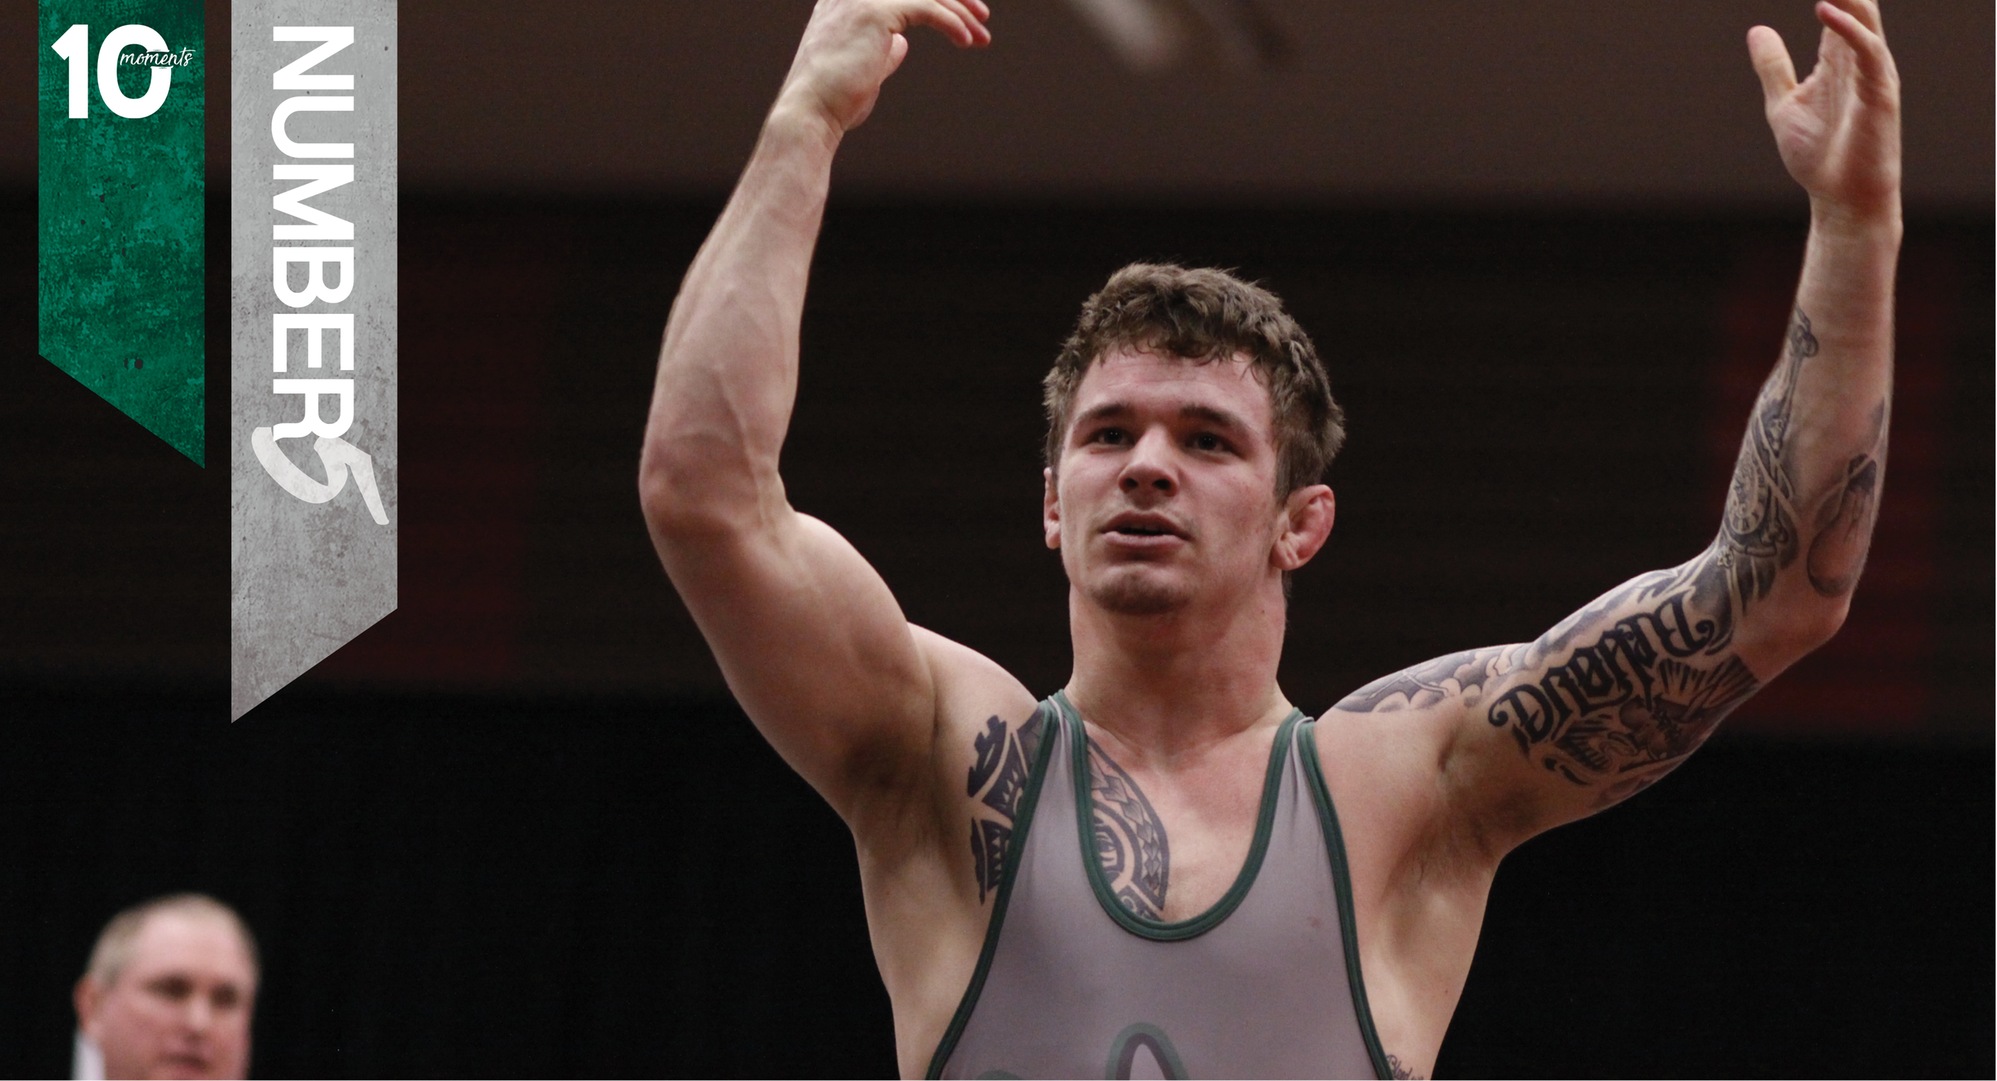 2017-18 CSU Athletics Top 10 Moments | #5 - Evan Cheek Wins EWL Title and Named Most Outstanding Wrestler